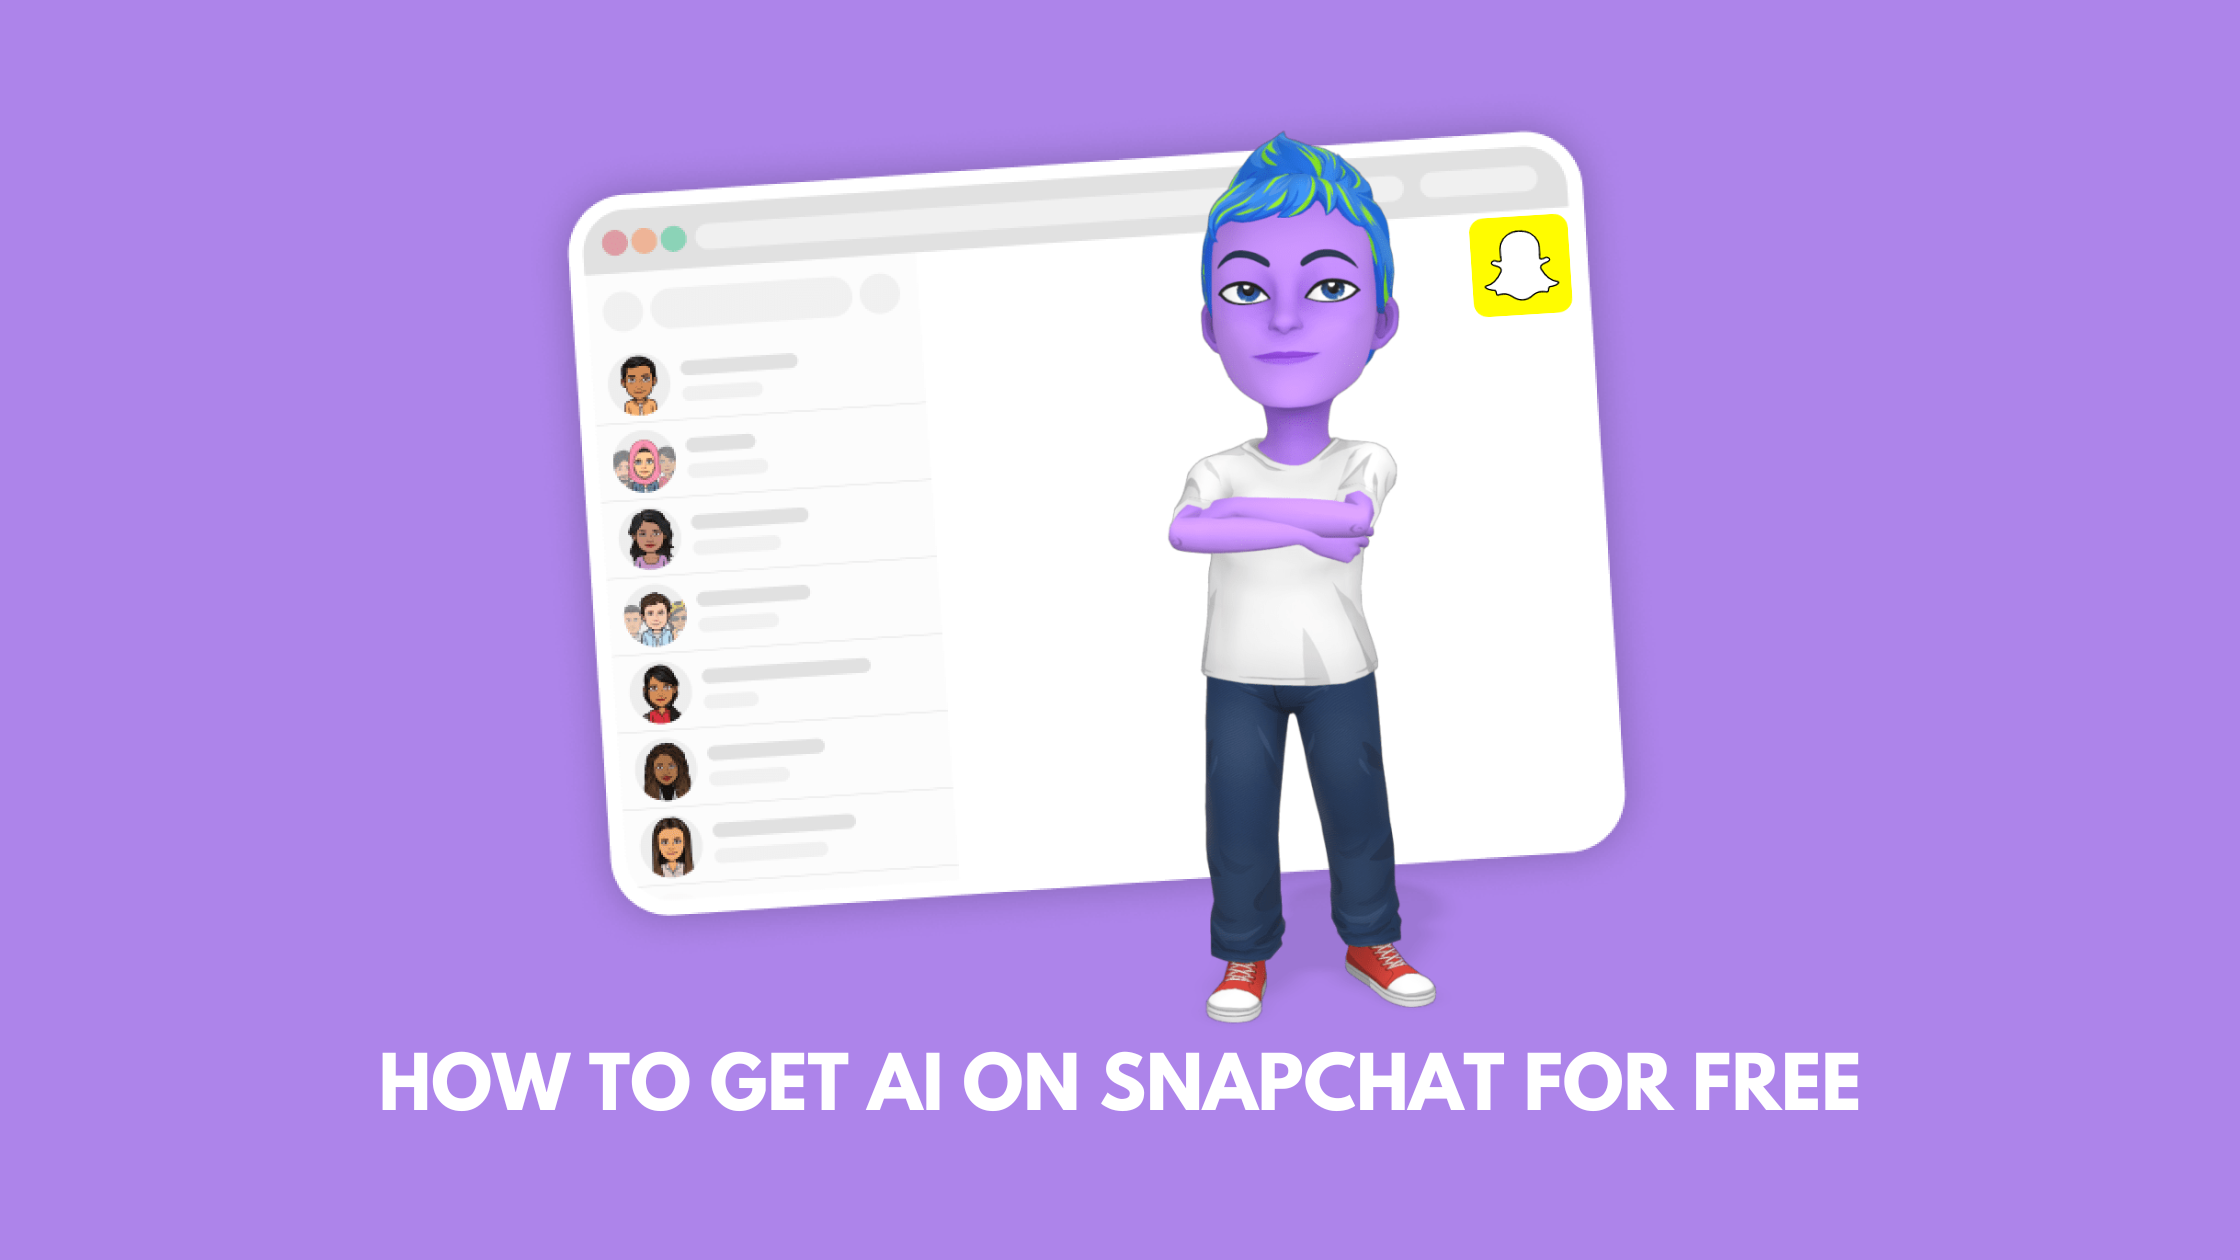 How to Get AI on Snapchat for Free